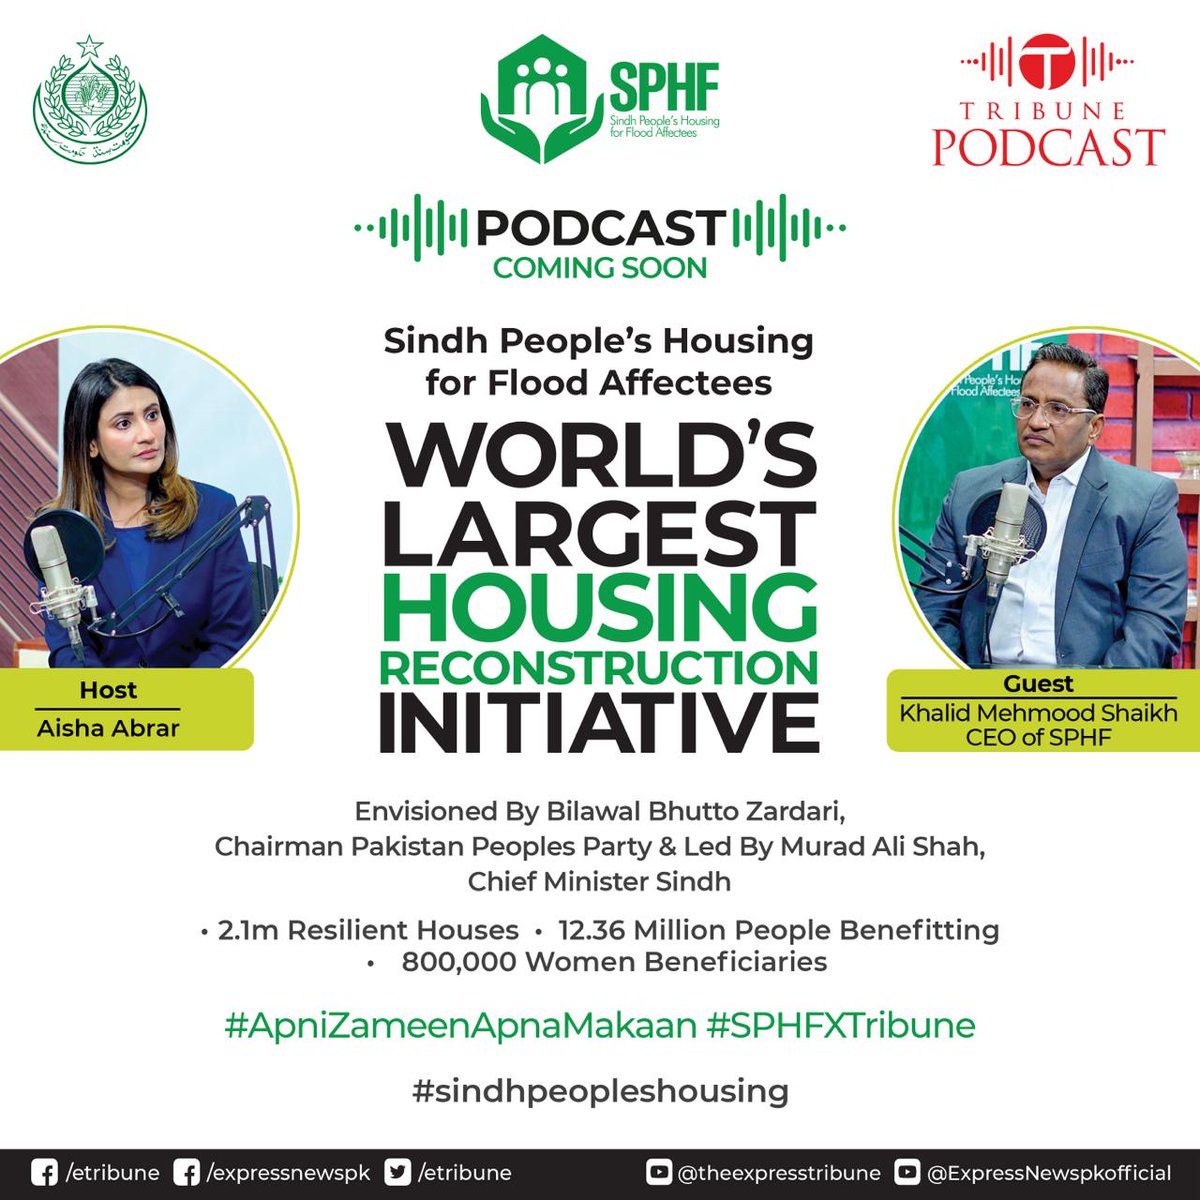 Coming soon! Hear from Khalid Mehmood Shaikh, CEO of Sindh People’s Housing for Flood Affectees, in conversation with host Aisha Abrar, as he discusses the world's largest housing reconstruction initiative envisioned by Chairman Pakistan Peoples Party Bilawal Bhutto Zardari and…